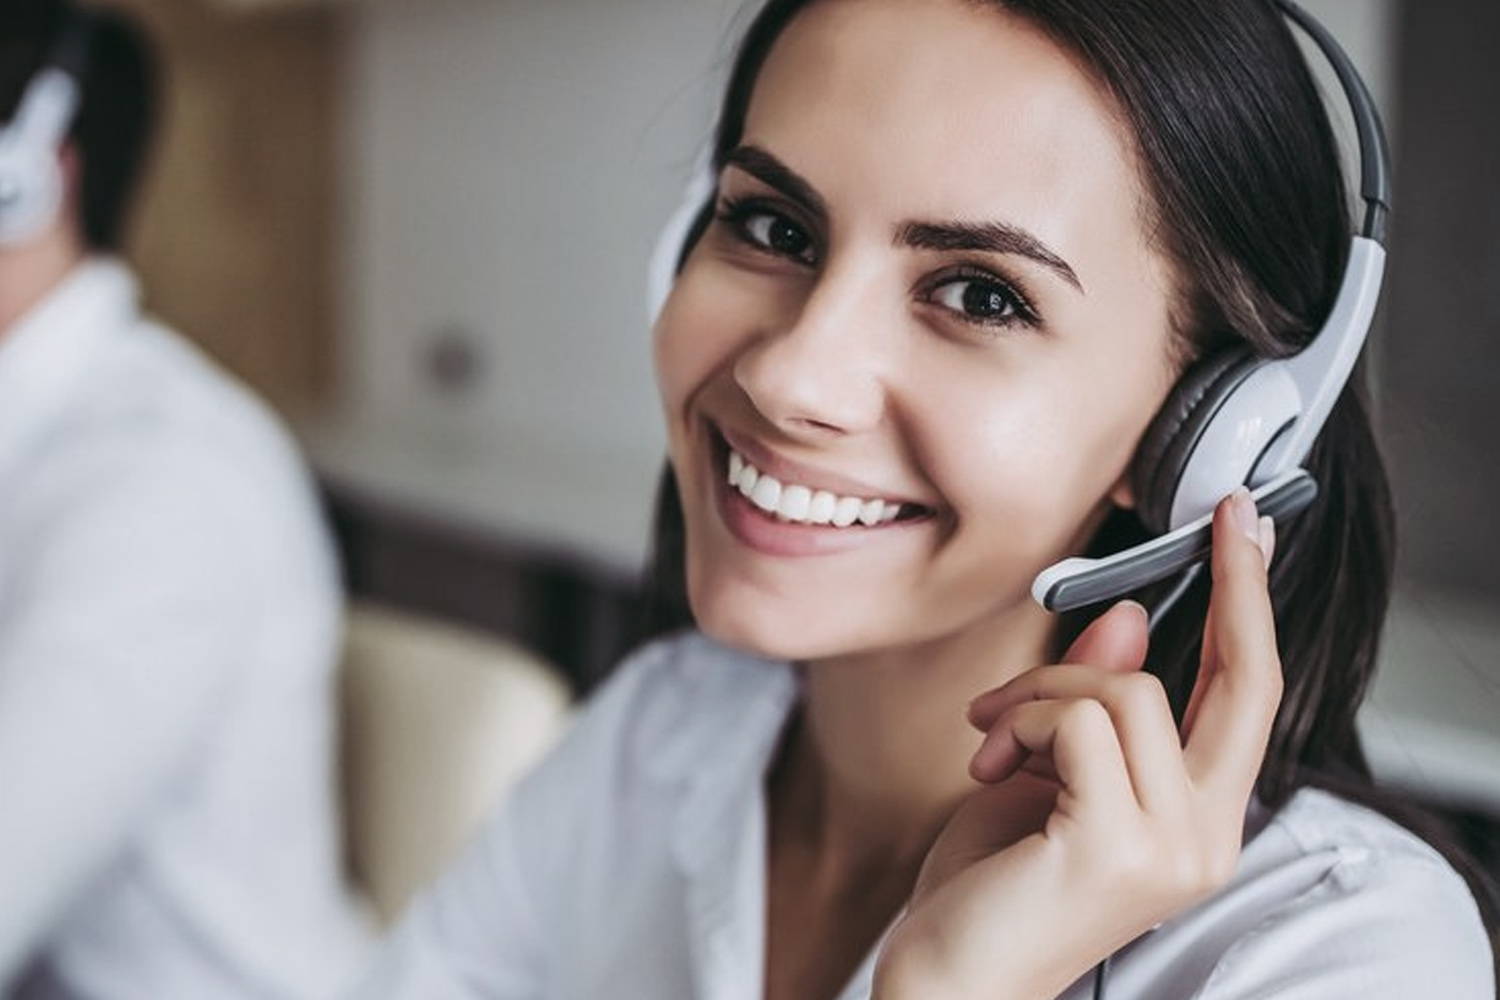 Image of Dremel DigiLab customer service representatives on a call and smiling 